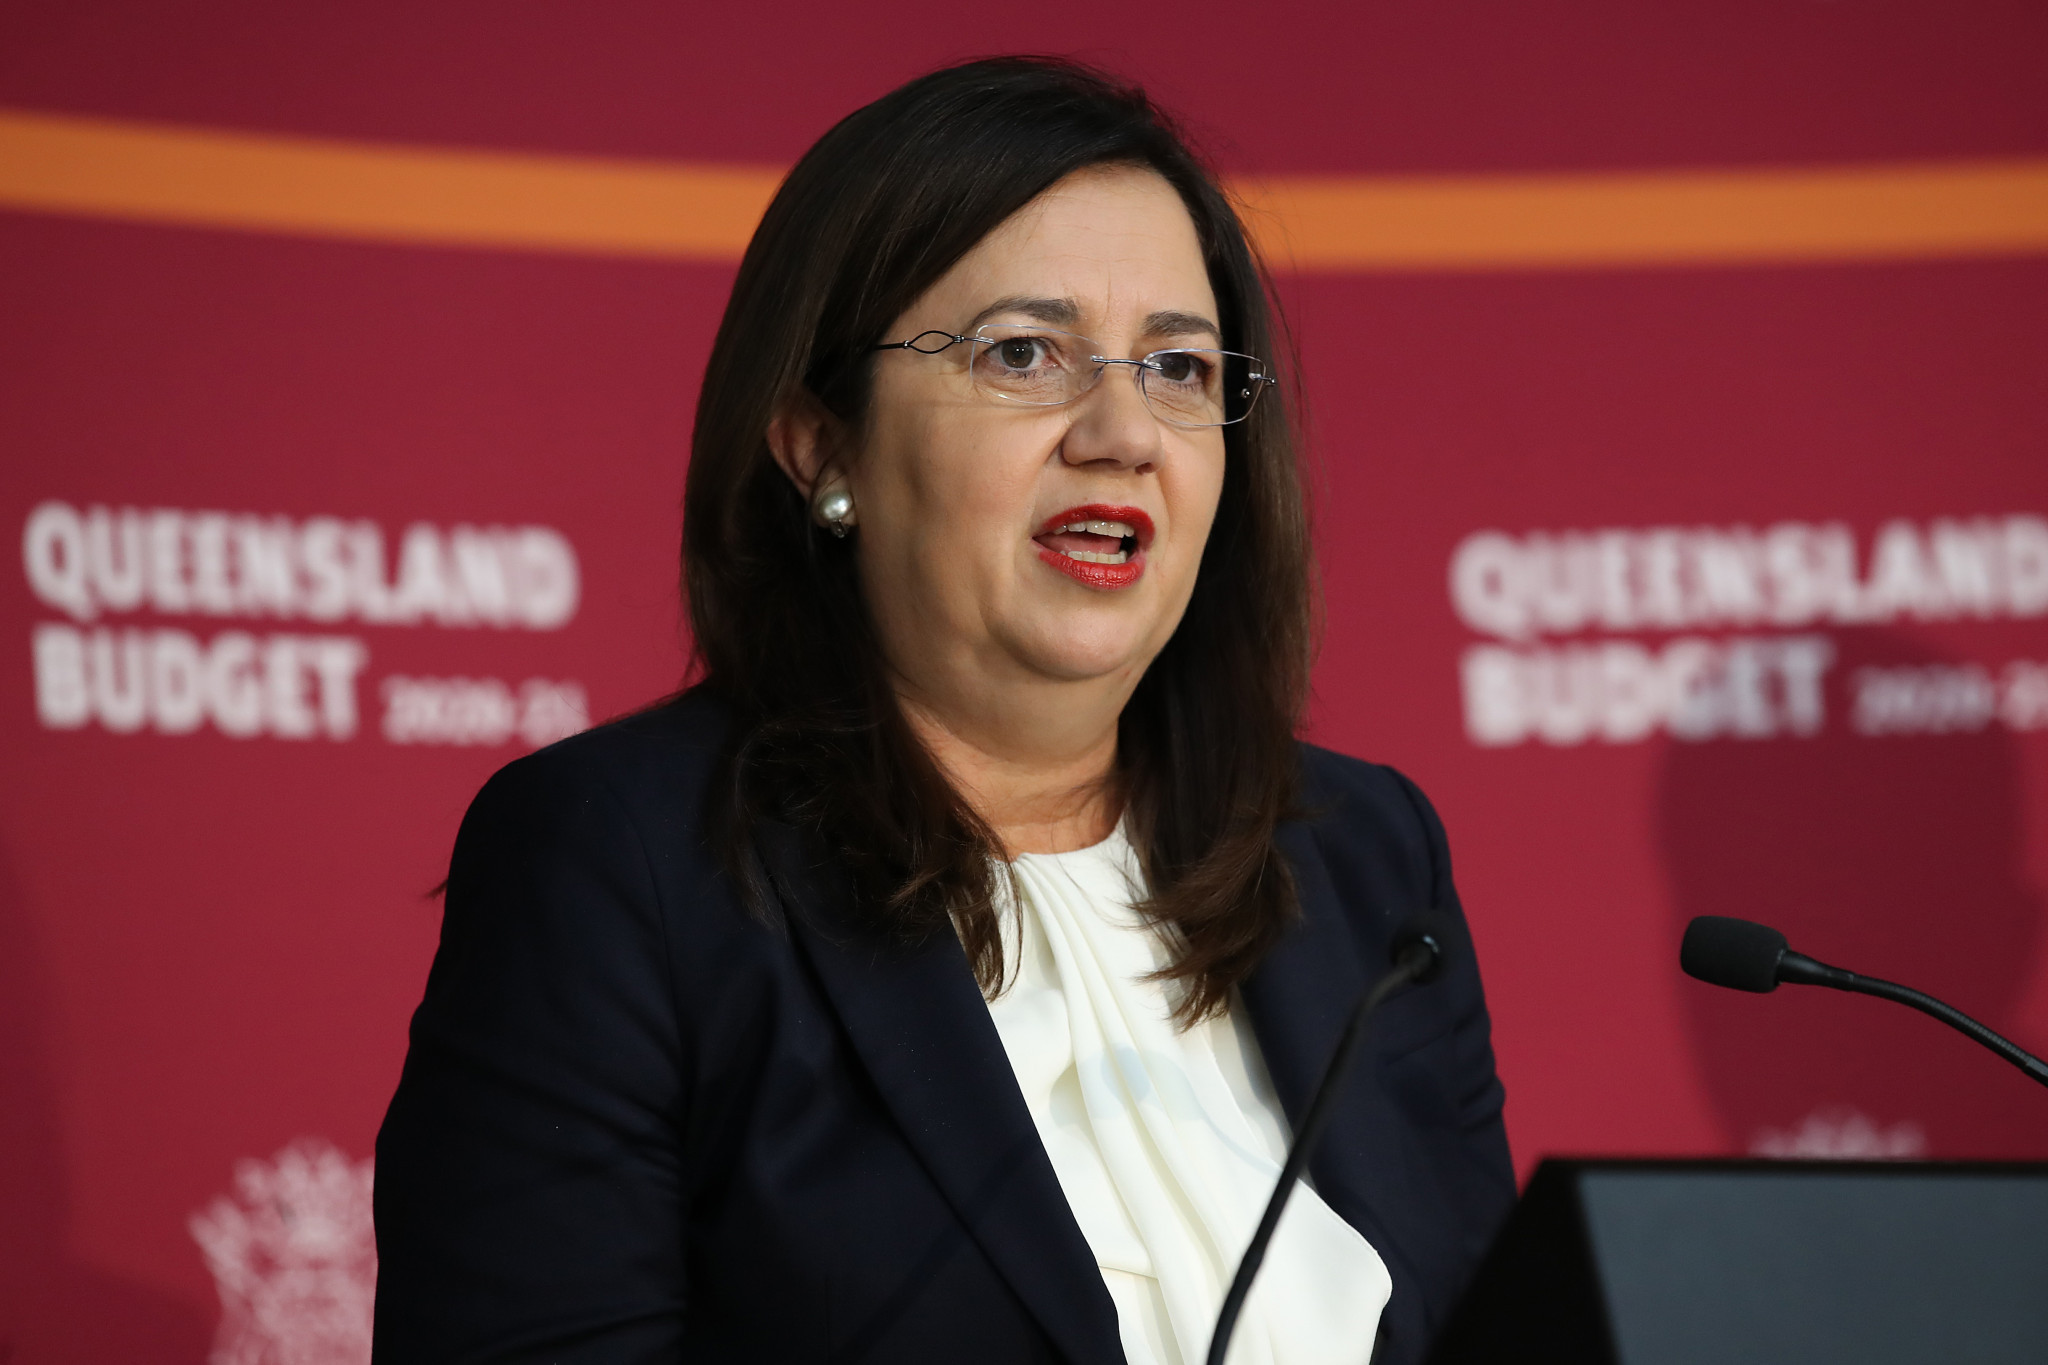 Queensland revives bid for 2032 Olympics and Paralympics